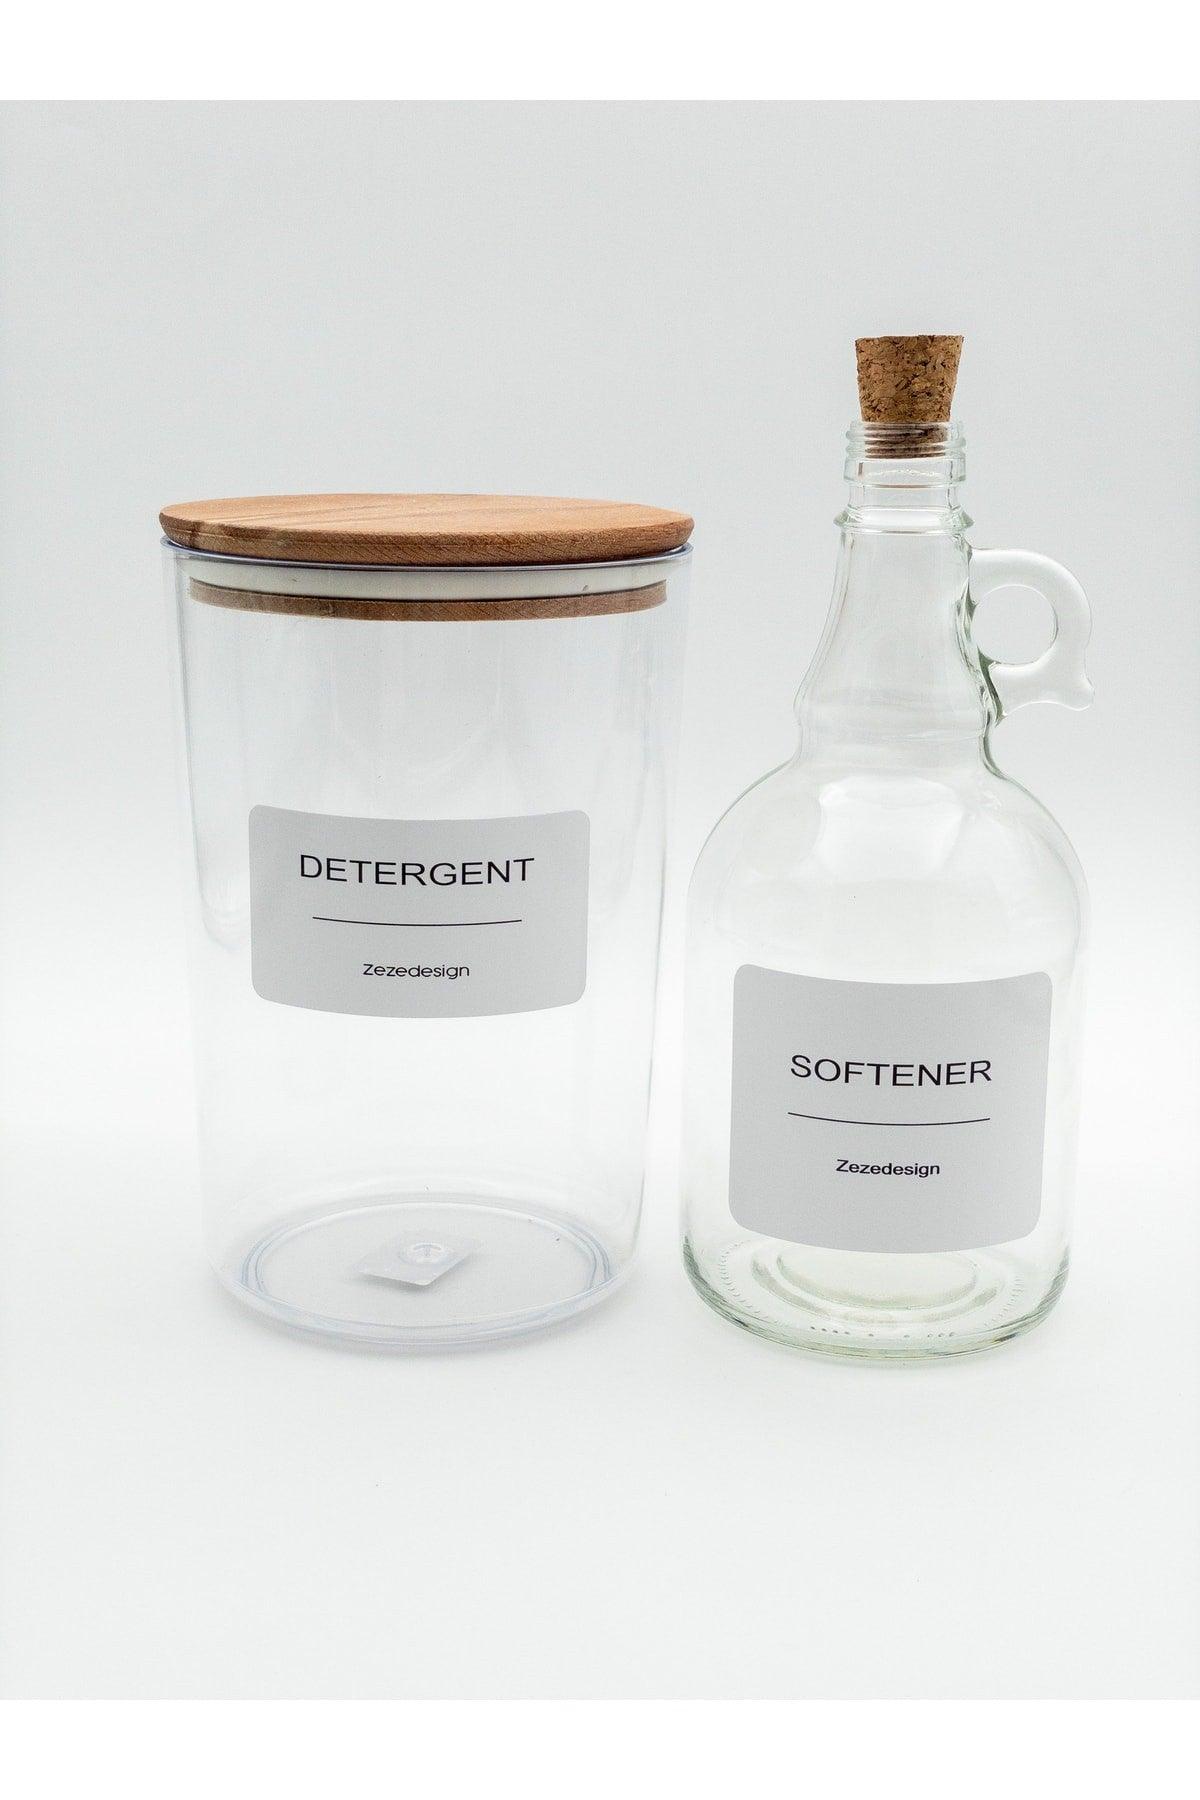 Powder Detergent Jar / Box With Wooden Lid 2300ml And Softener Bottle With Cork Cap 1000ml - Swordslife